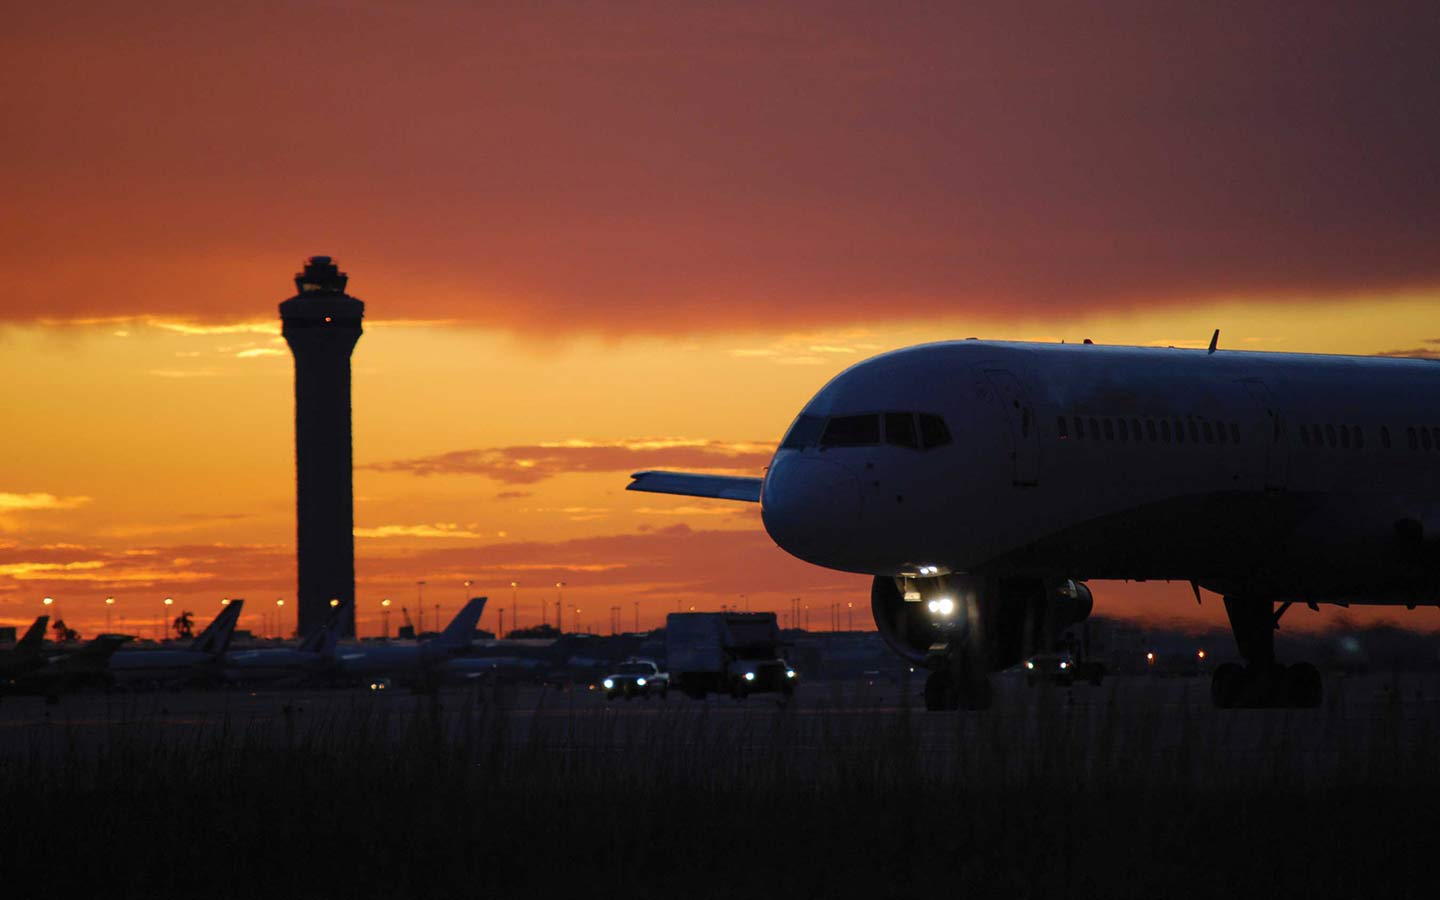 Airport and control tower at dusk